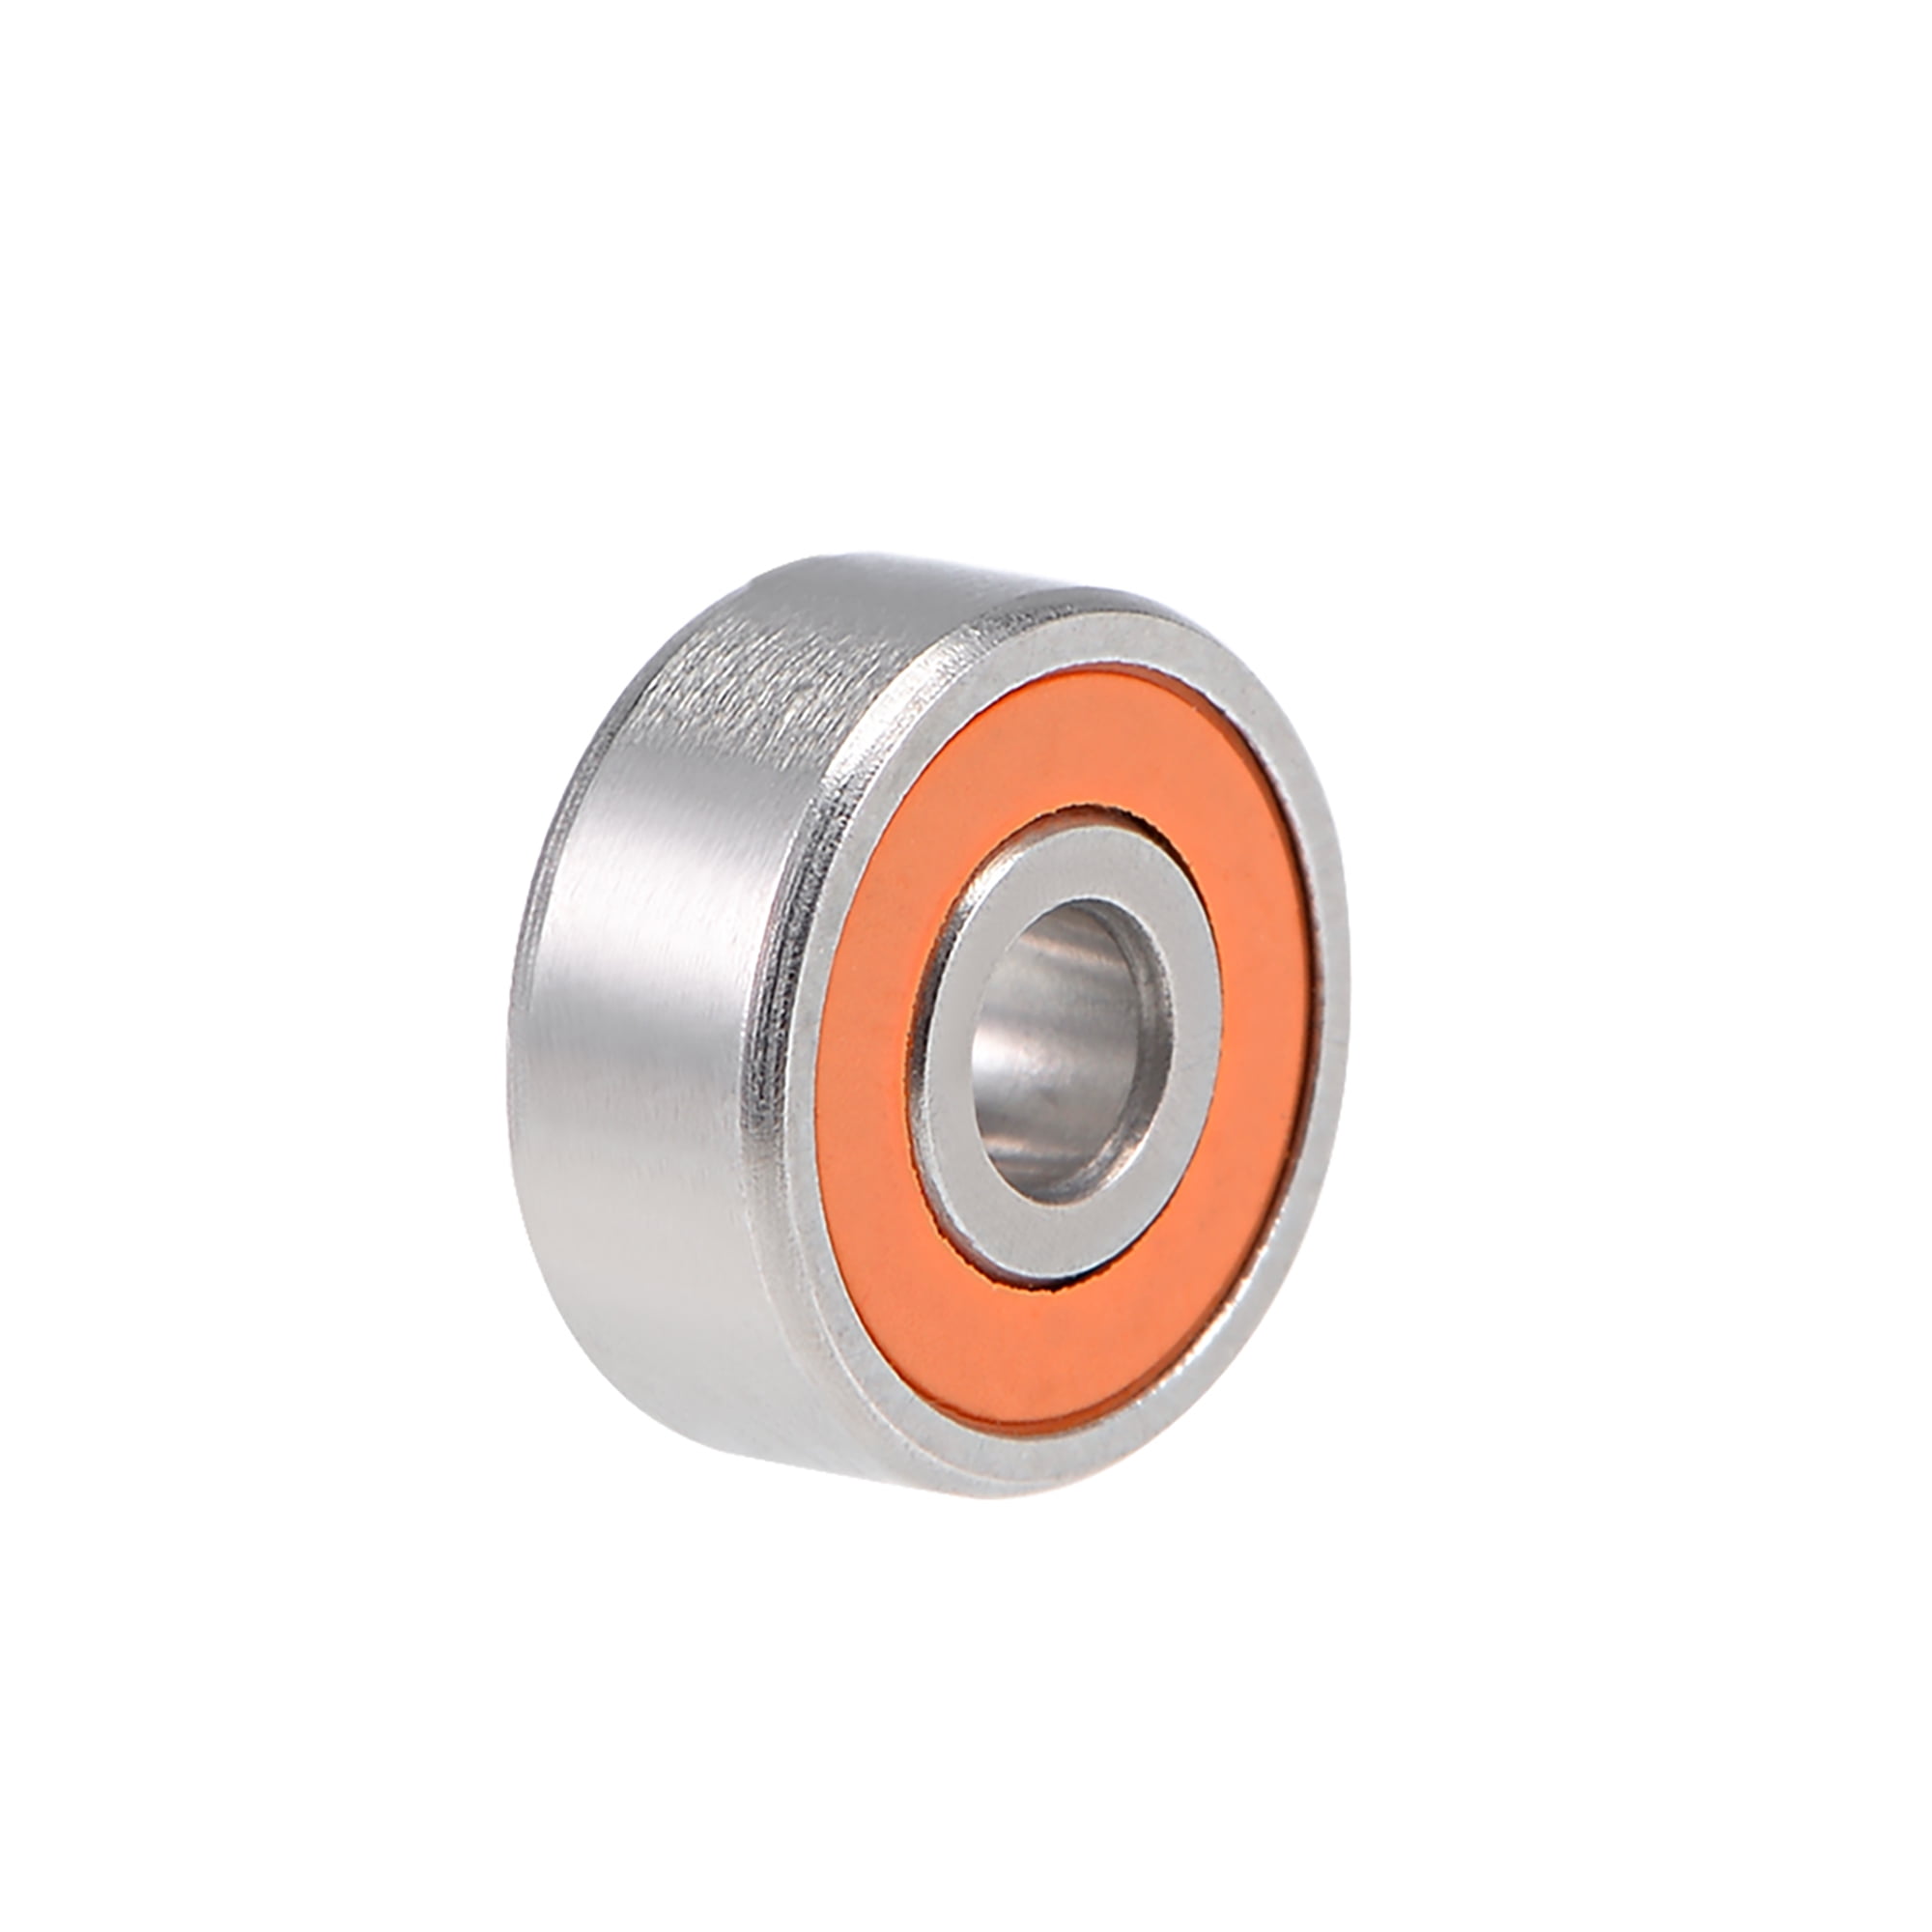 Details about   SMR85C-2OS Hybrid Ceramic Ball Bearing 5x8x2.5mm ABEC-7 Stainless Steel Bearings 